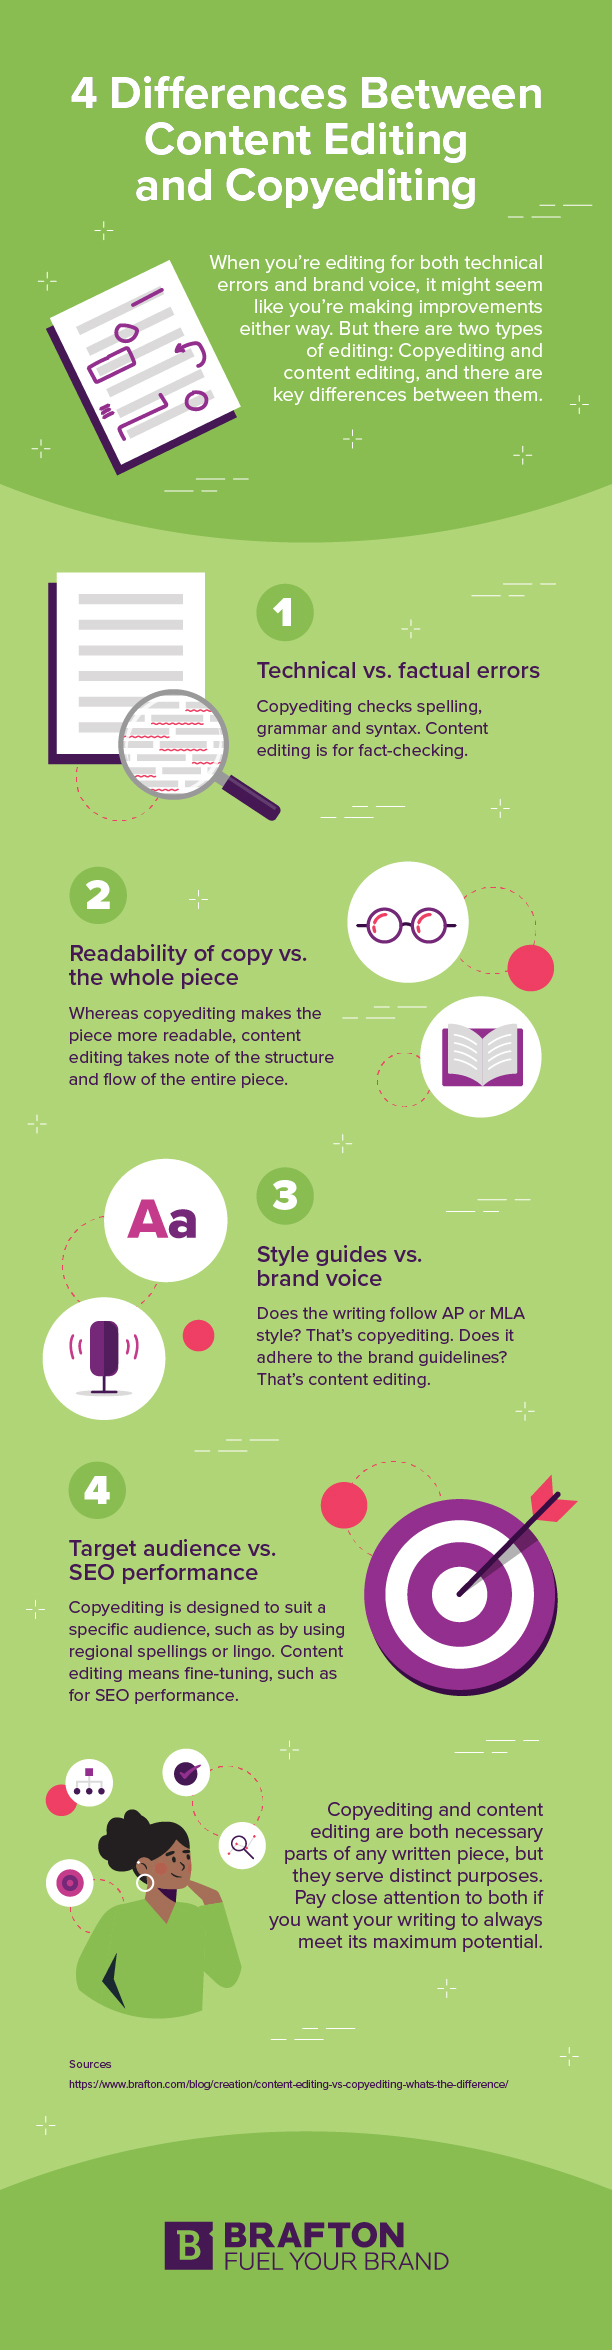 4 differences between Content editing and copyediting - Infographic